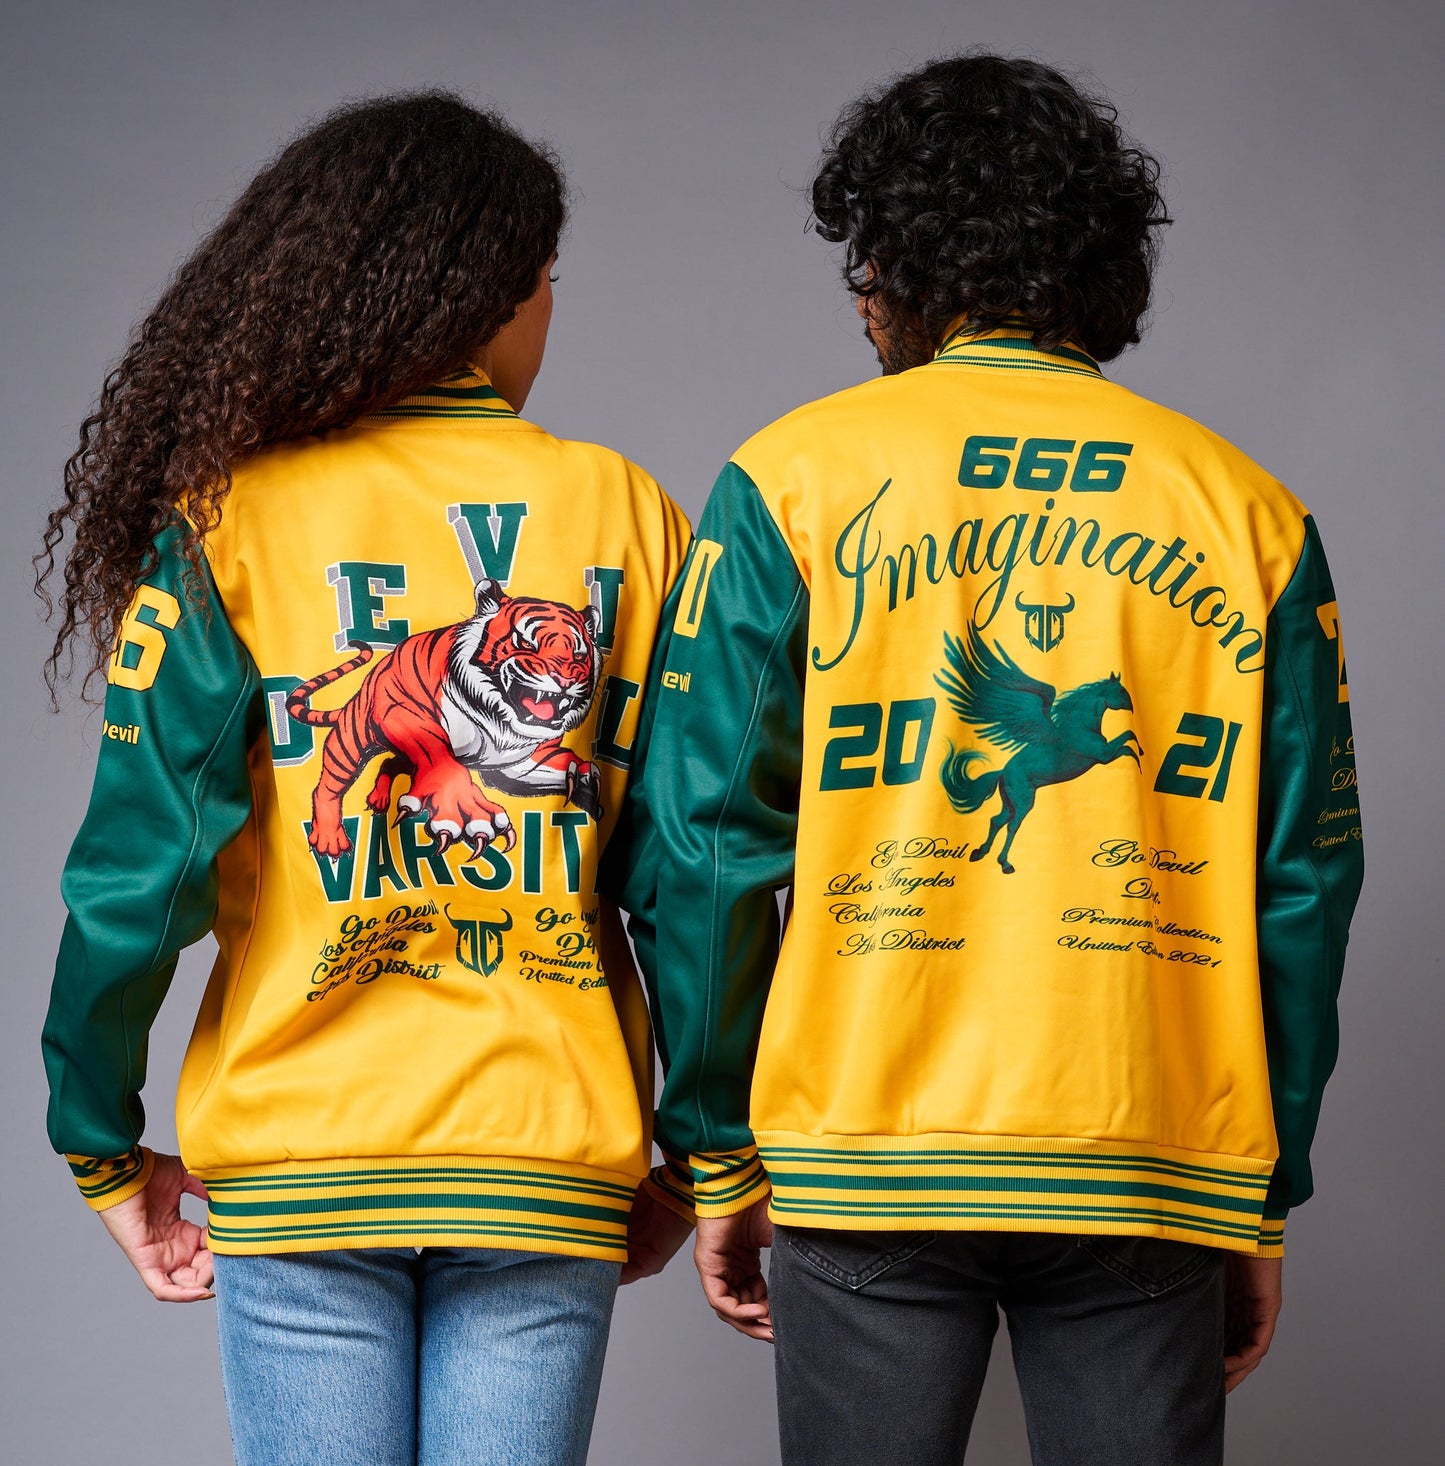 Yellow & Green Couples Coord - Varsity Jacket Coord - Go Devil